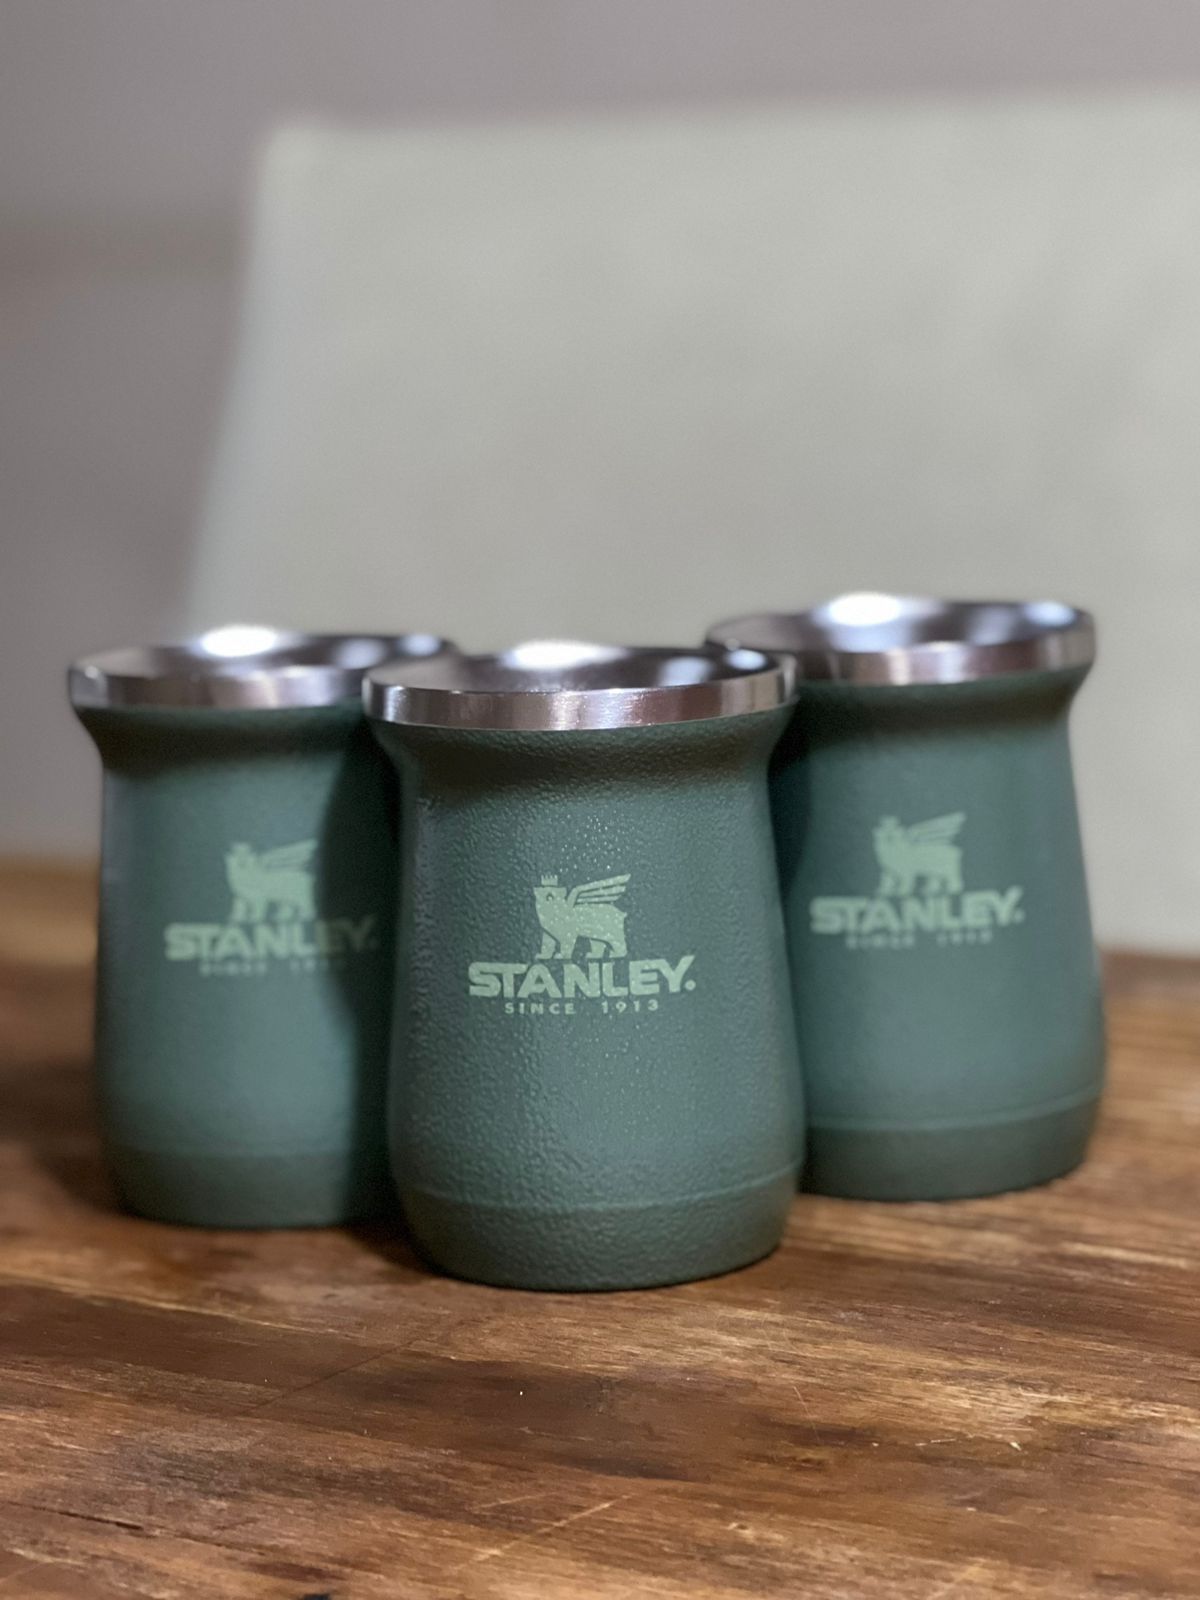 Mate Stanley  Verde – Mate Place